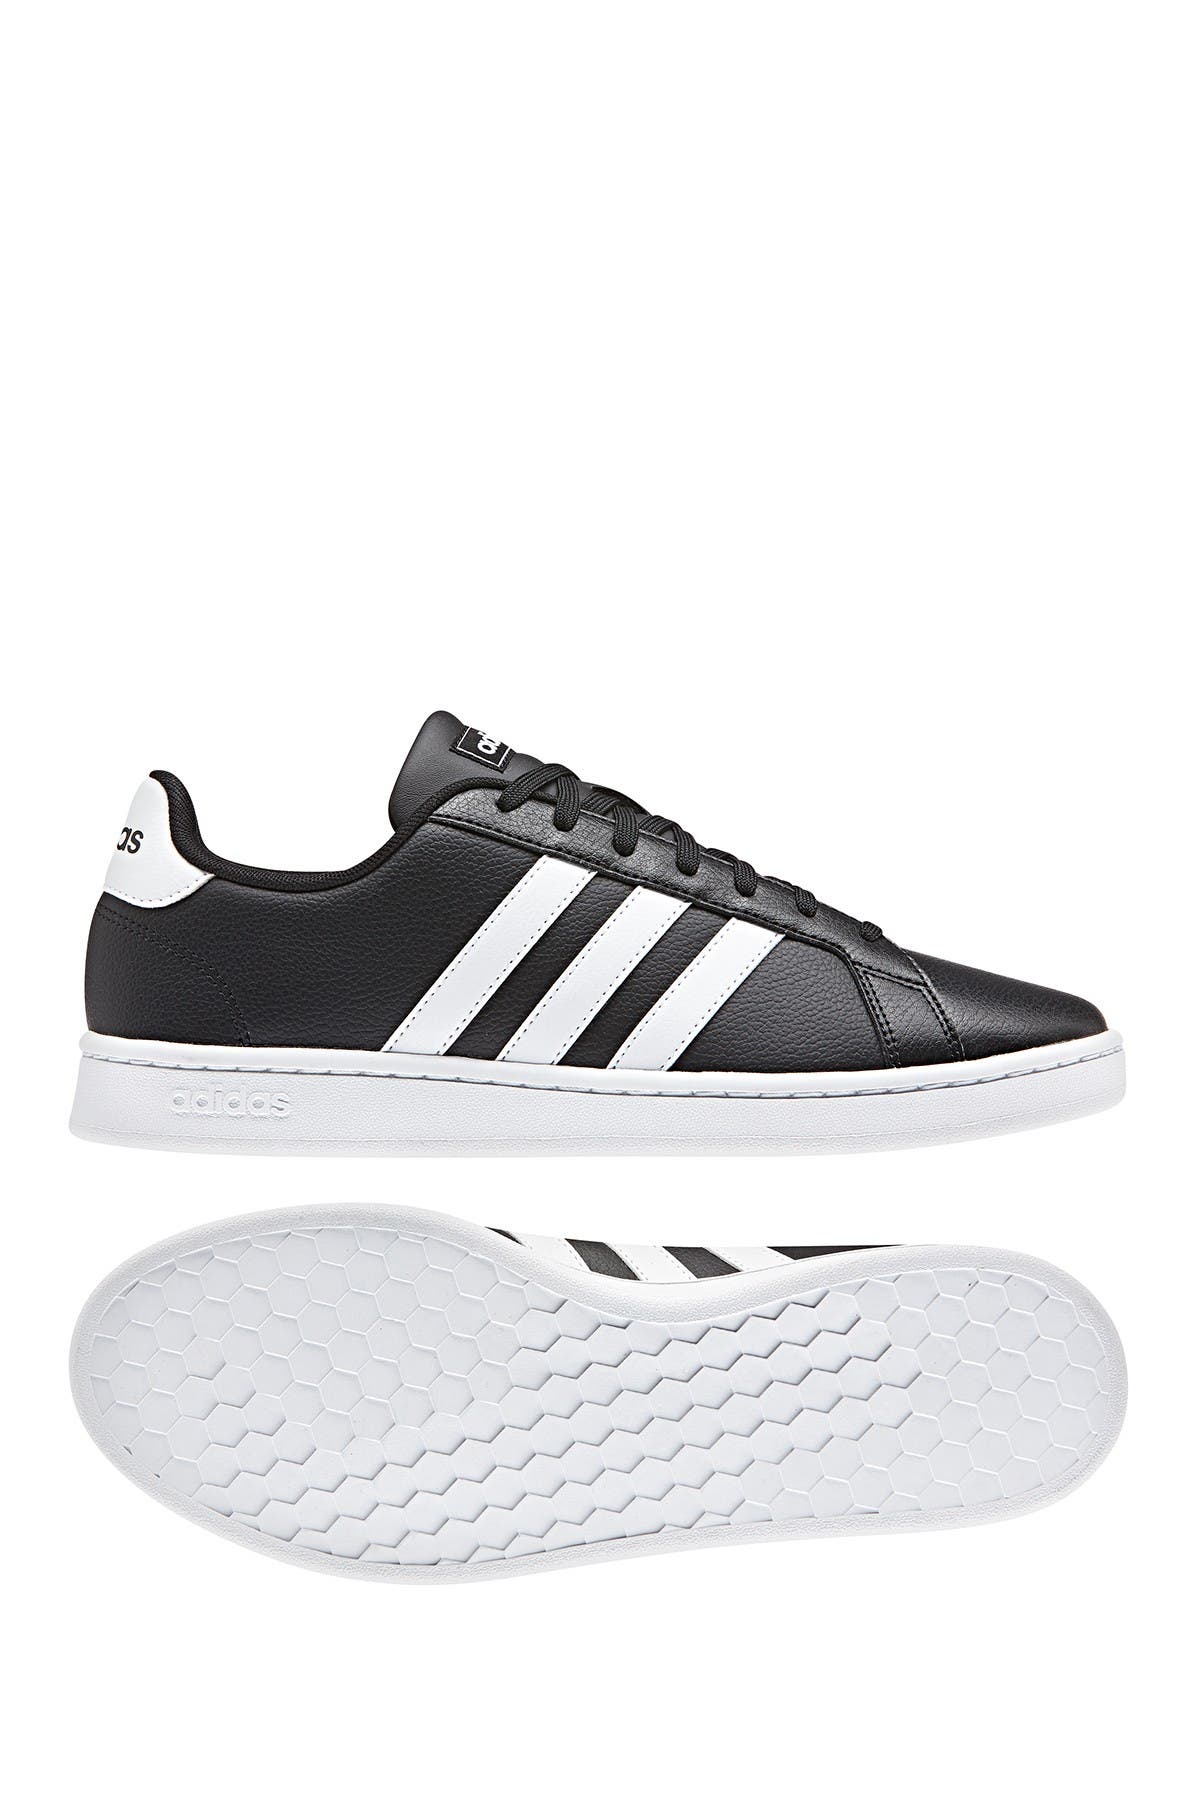 adidas grand court leather sneaker